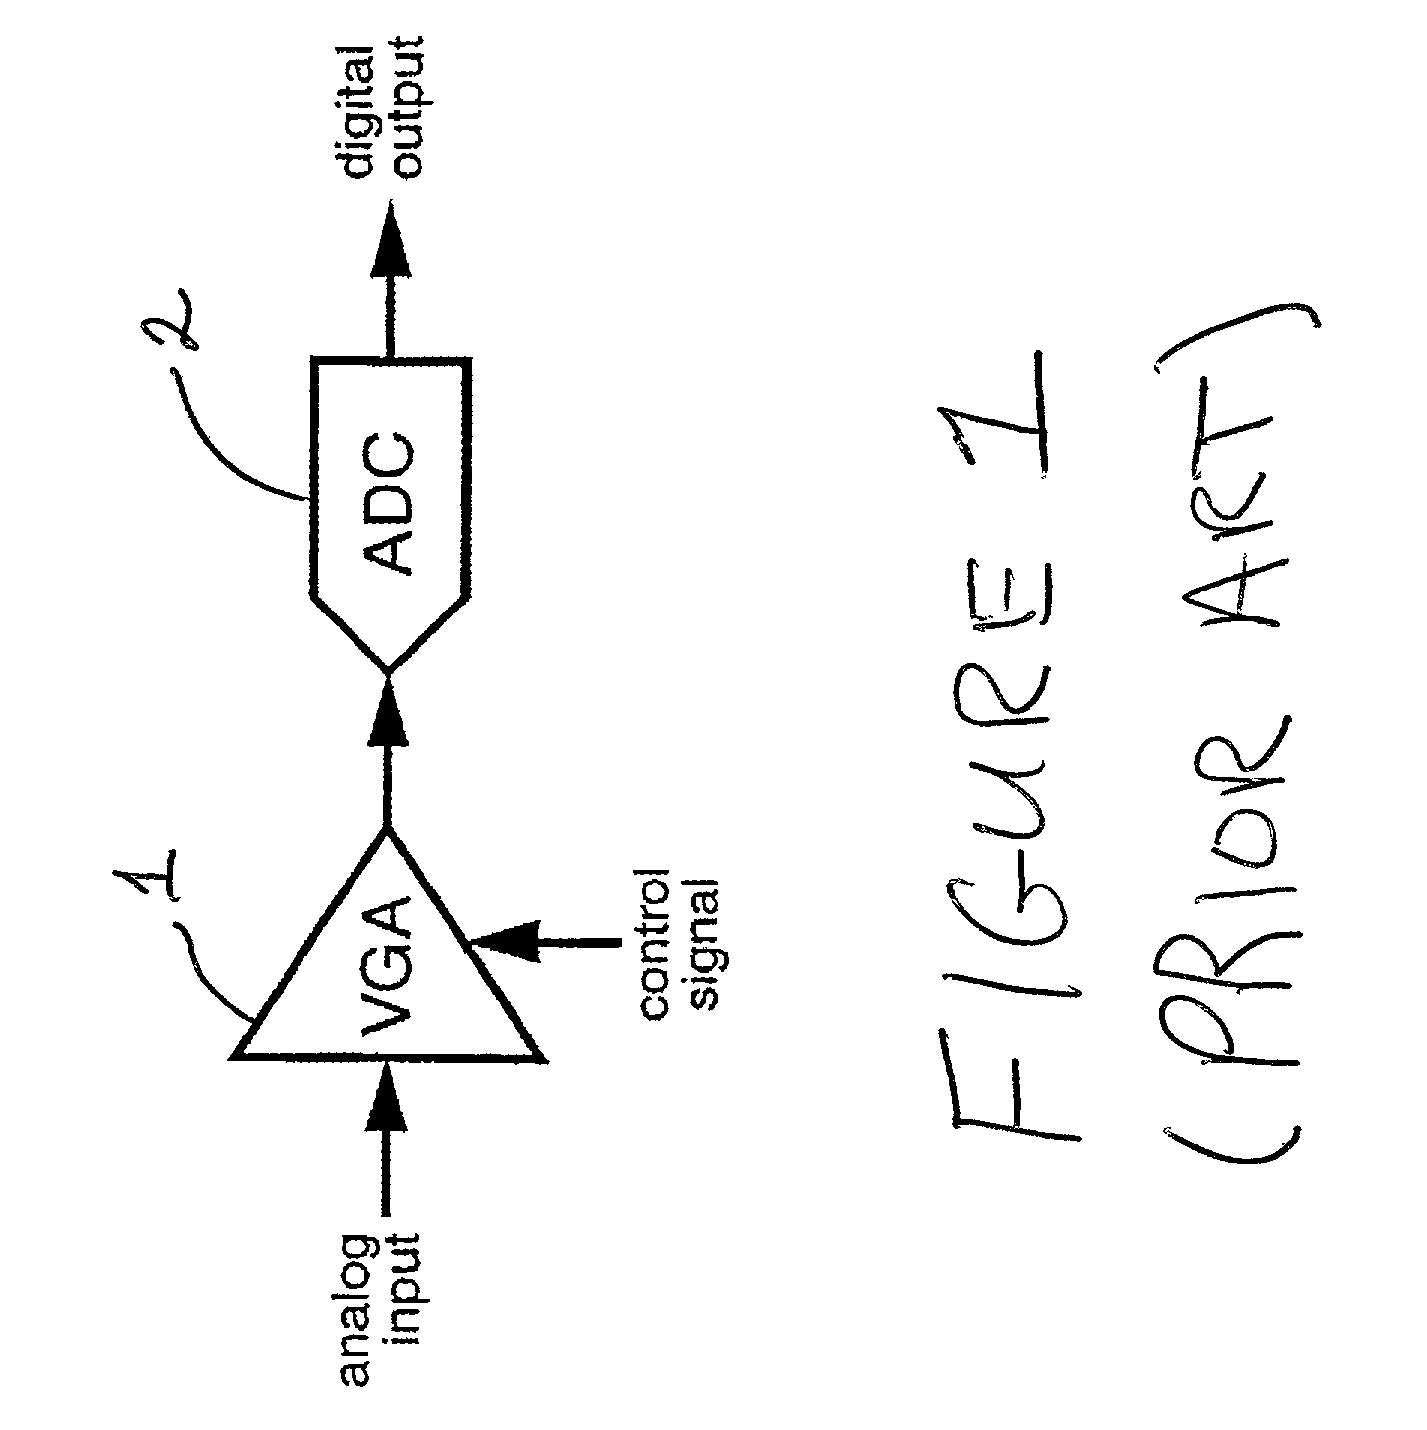 Multi-bit sigma-delta analog to digital converter with a variable full scale